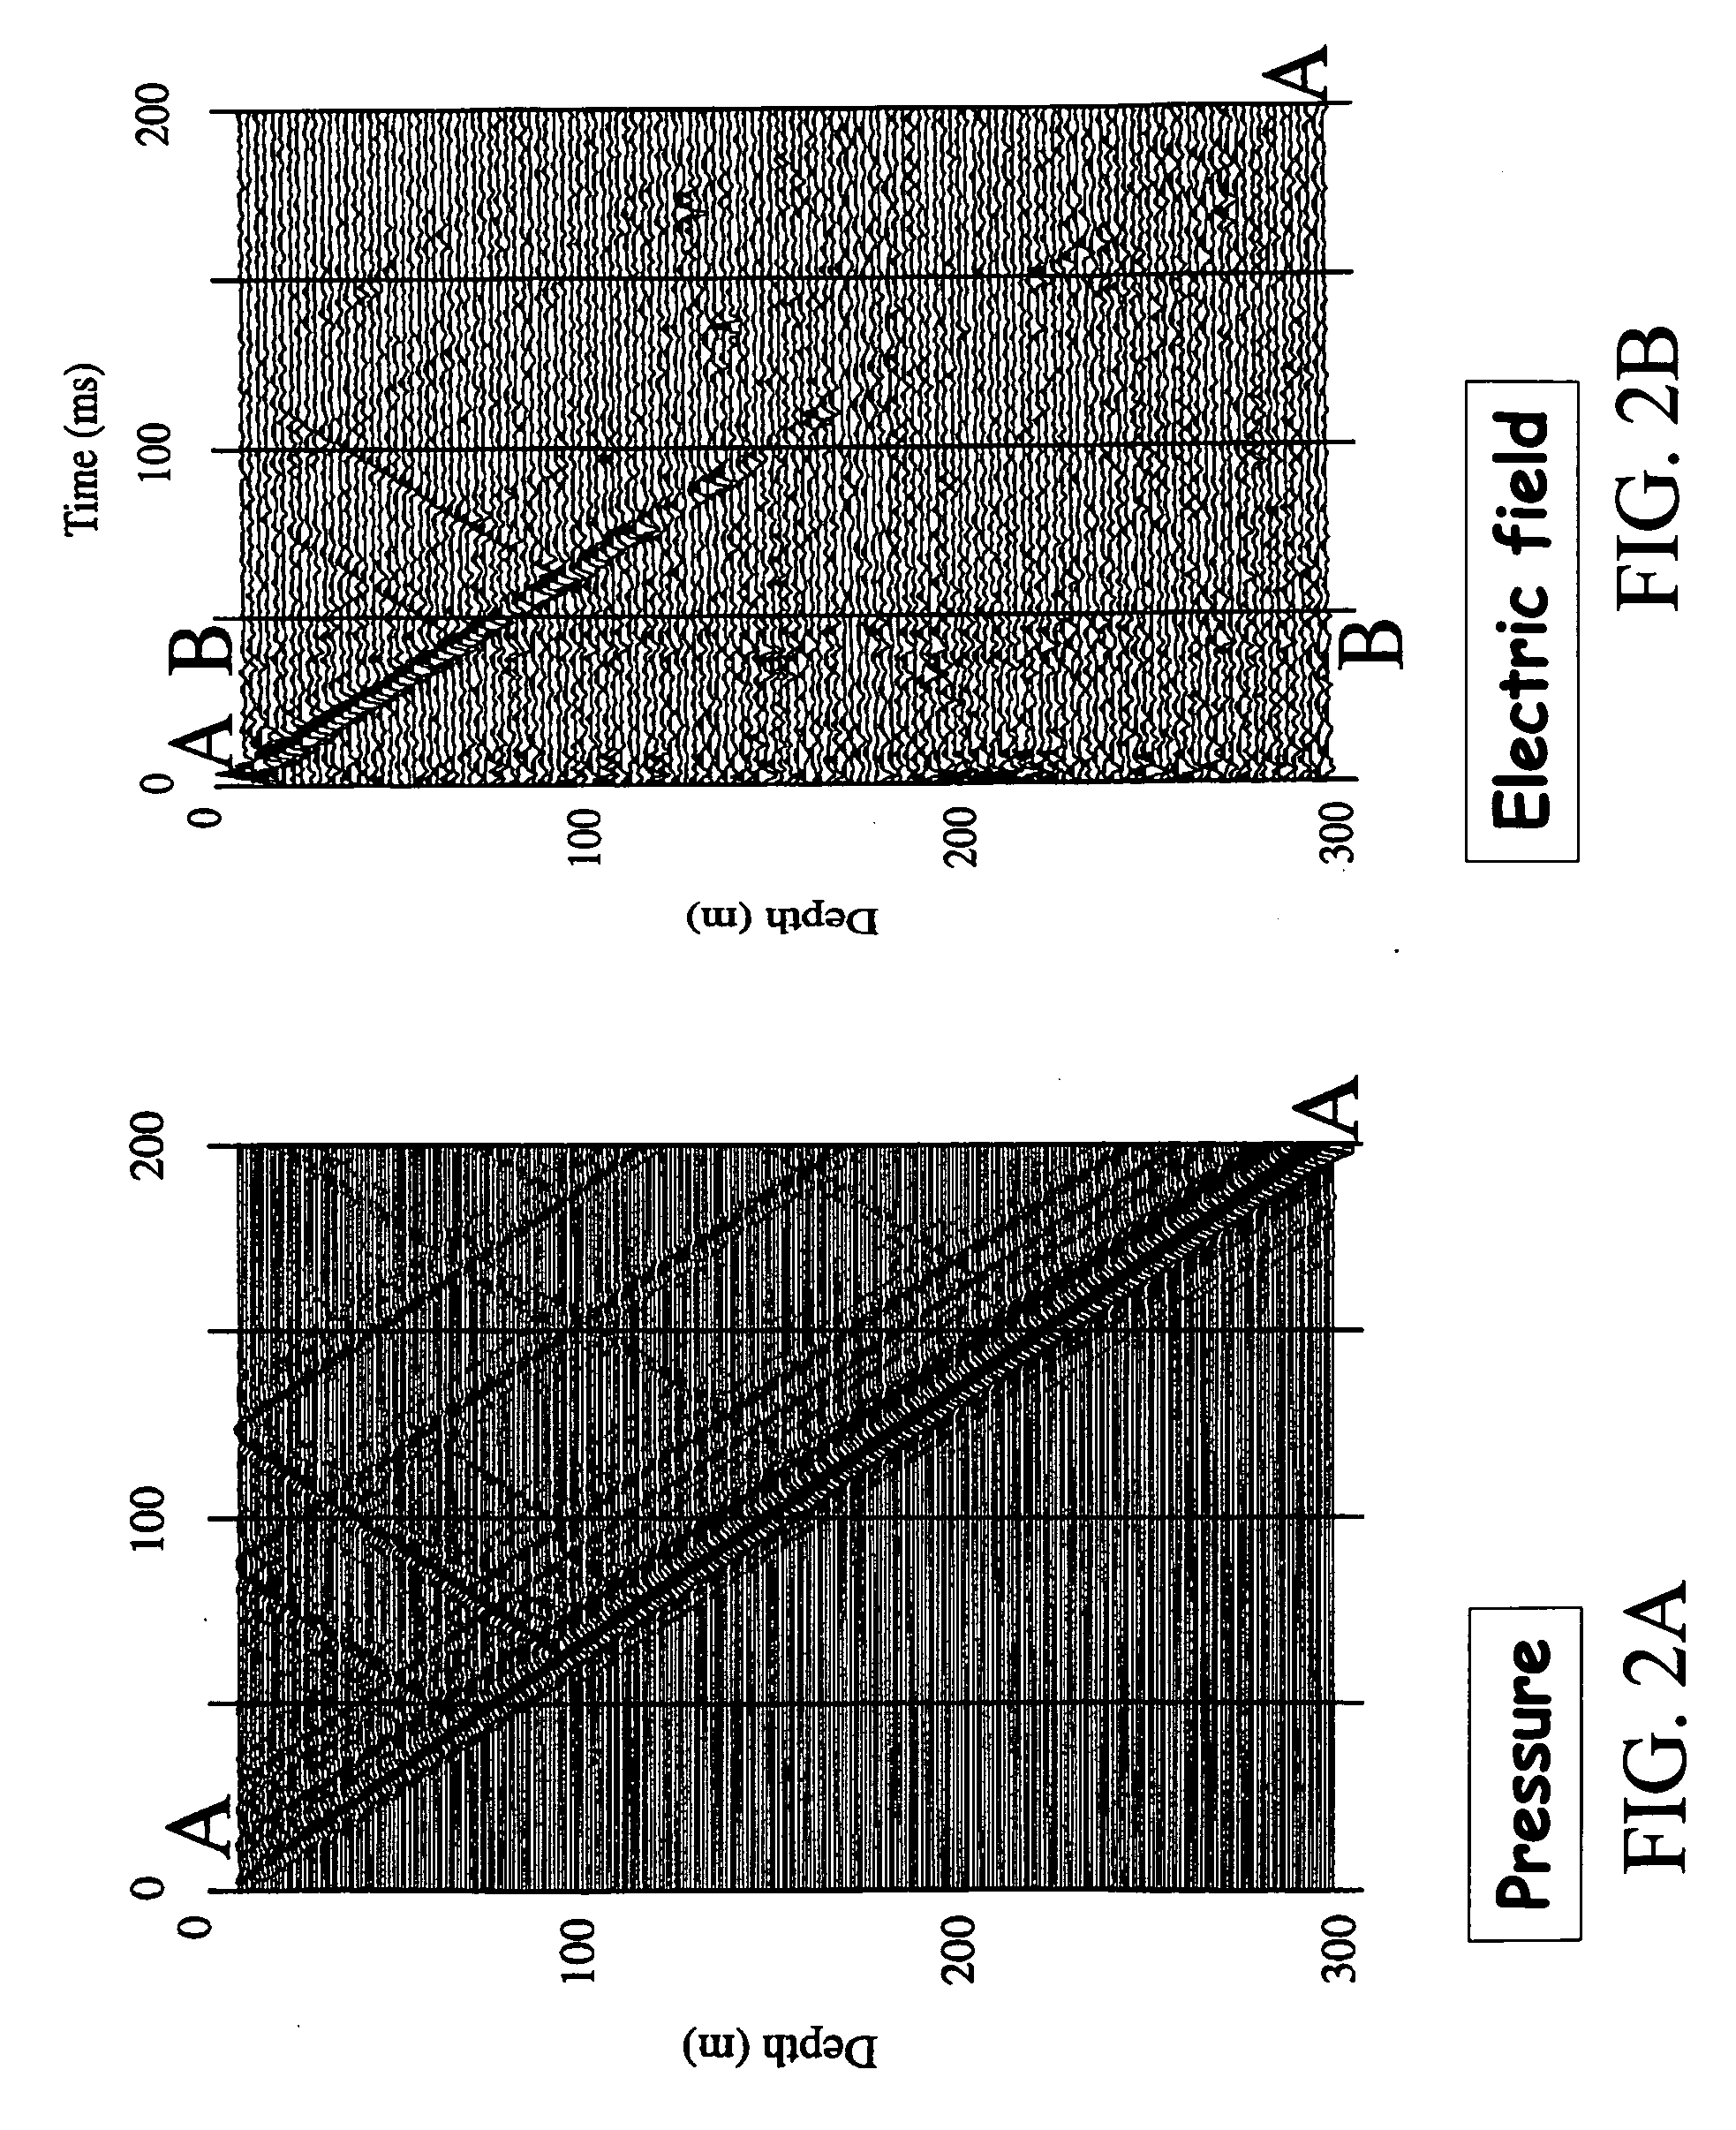 Method for acquiring and interpreting seismoelectric and eletroseismic data